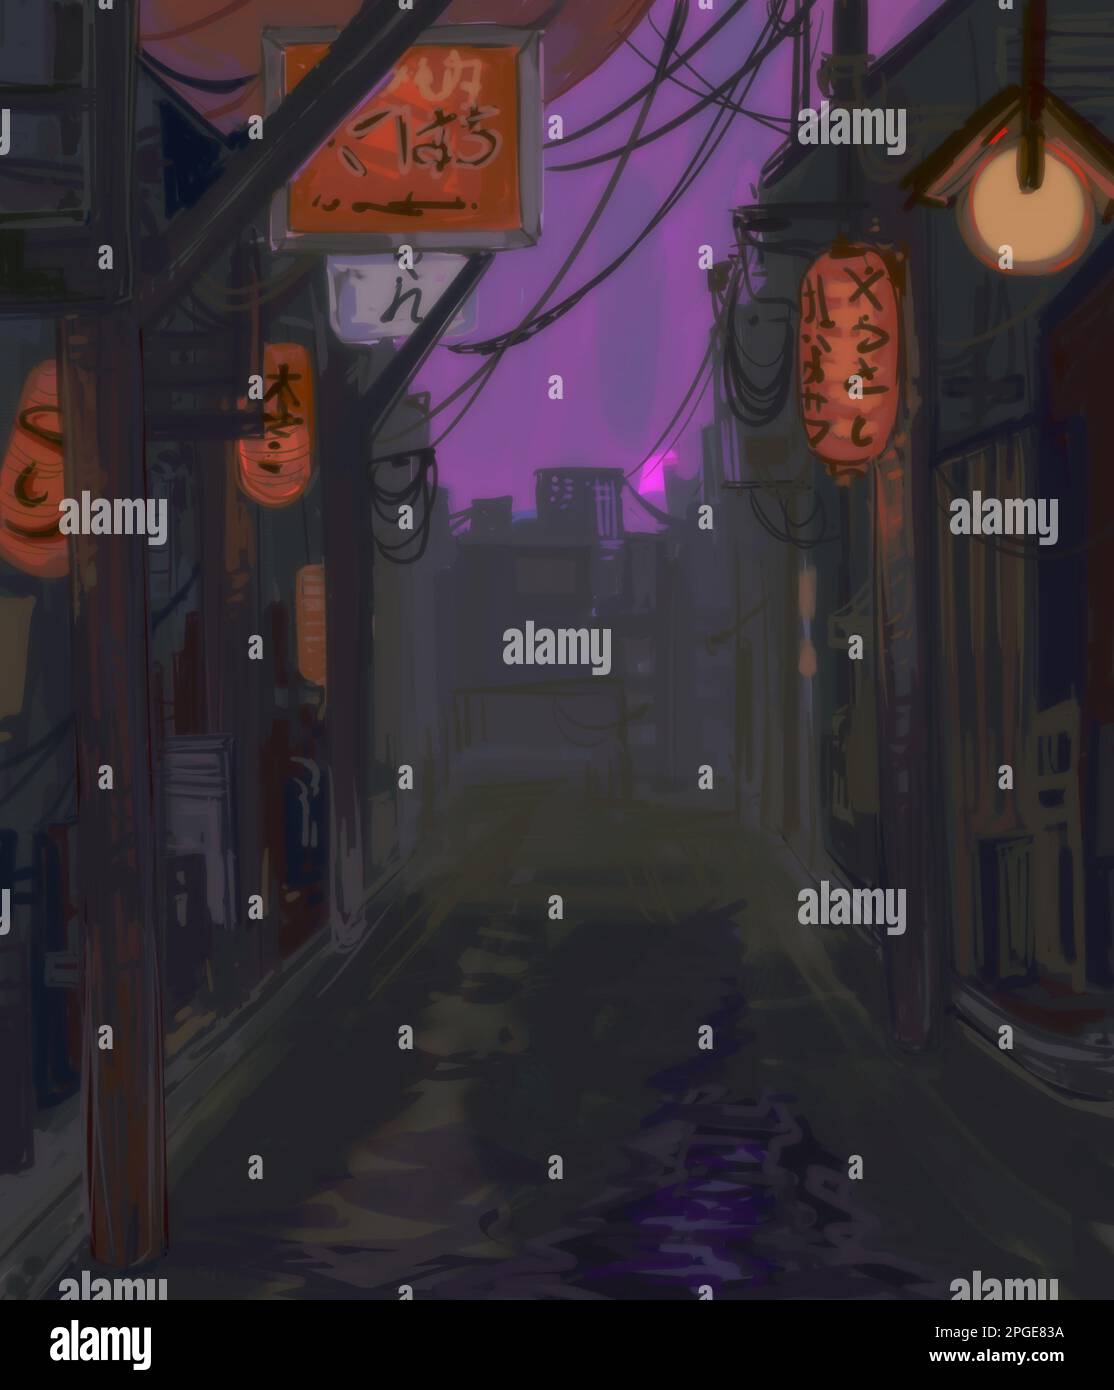 An illustration of a cartoon-style alleyway in an Asian city, featuring a dark nighttime setting with buildings and street lights in the background Stock Photo